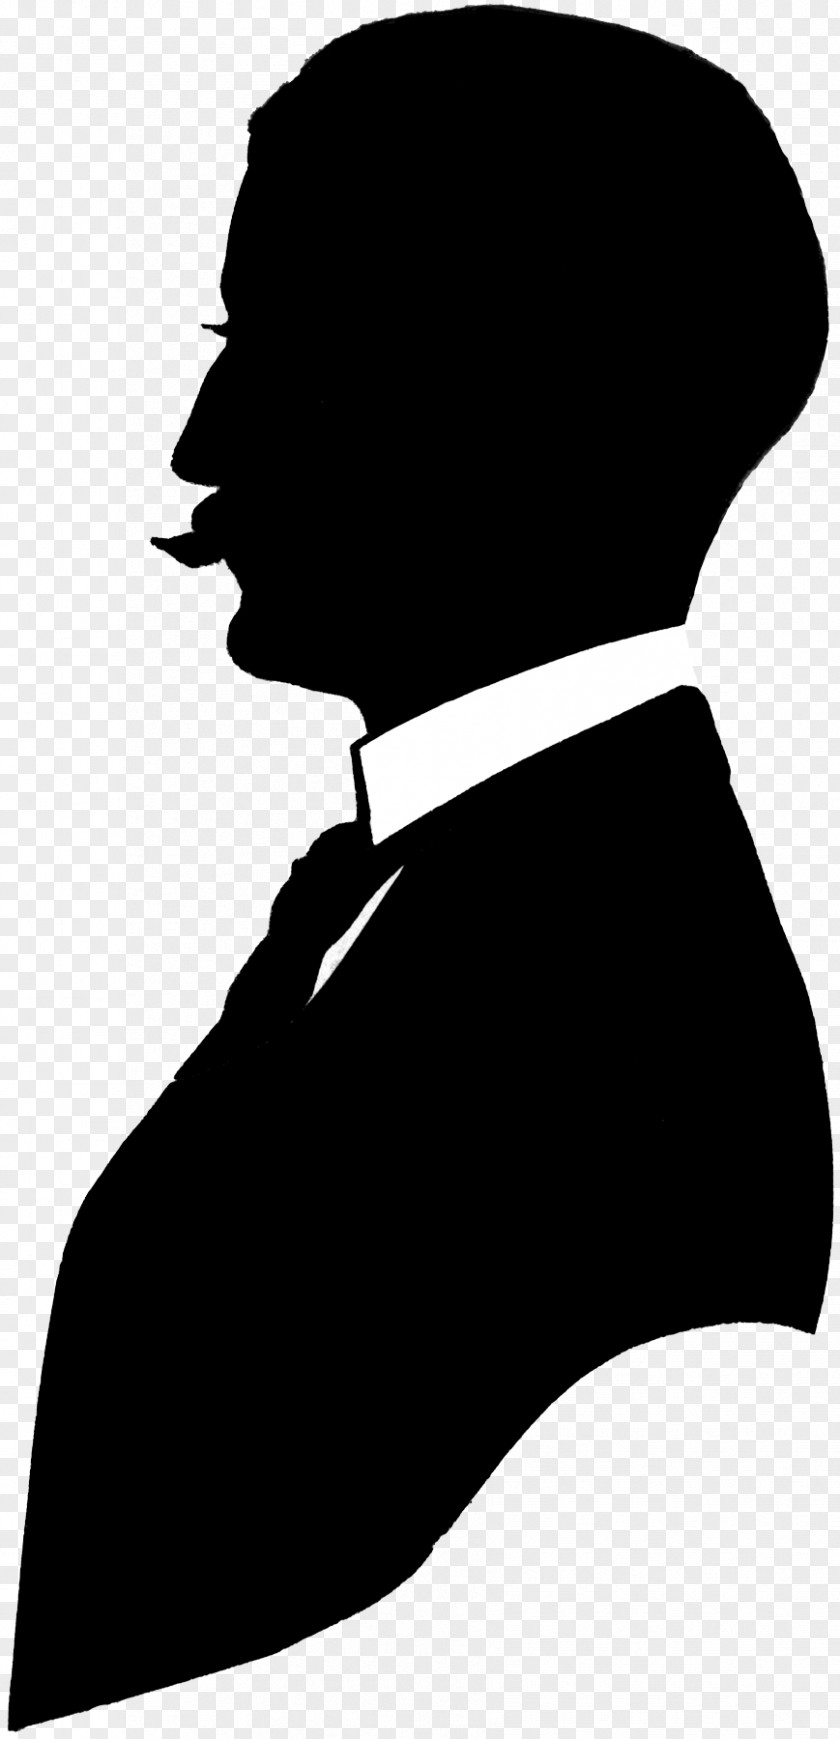 Gentleman Monochrome Photography Black And White Silhouette PNG